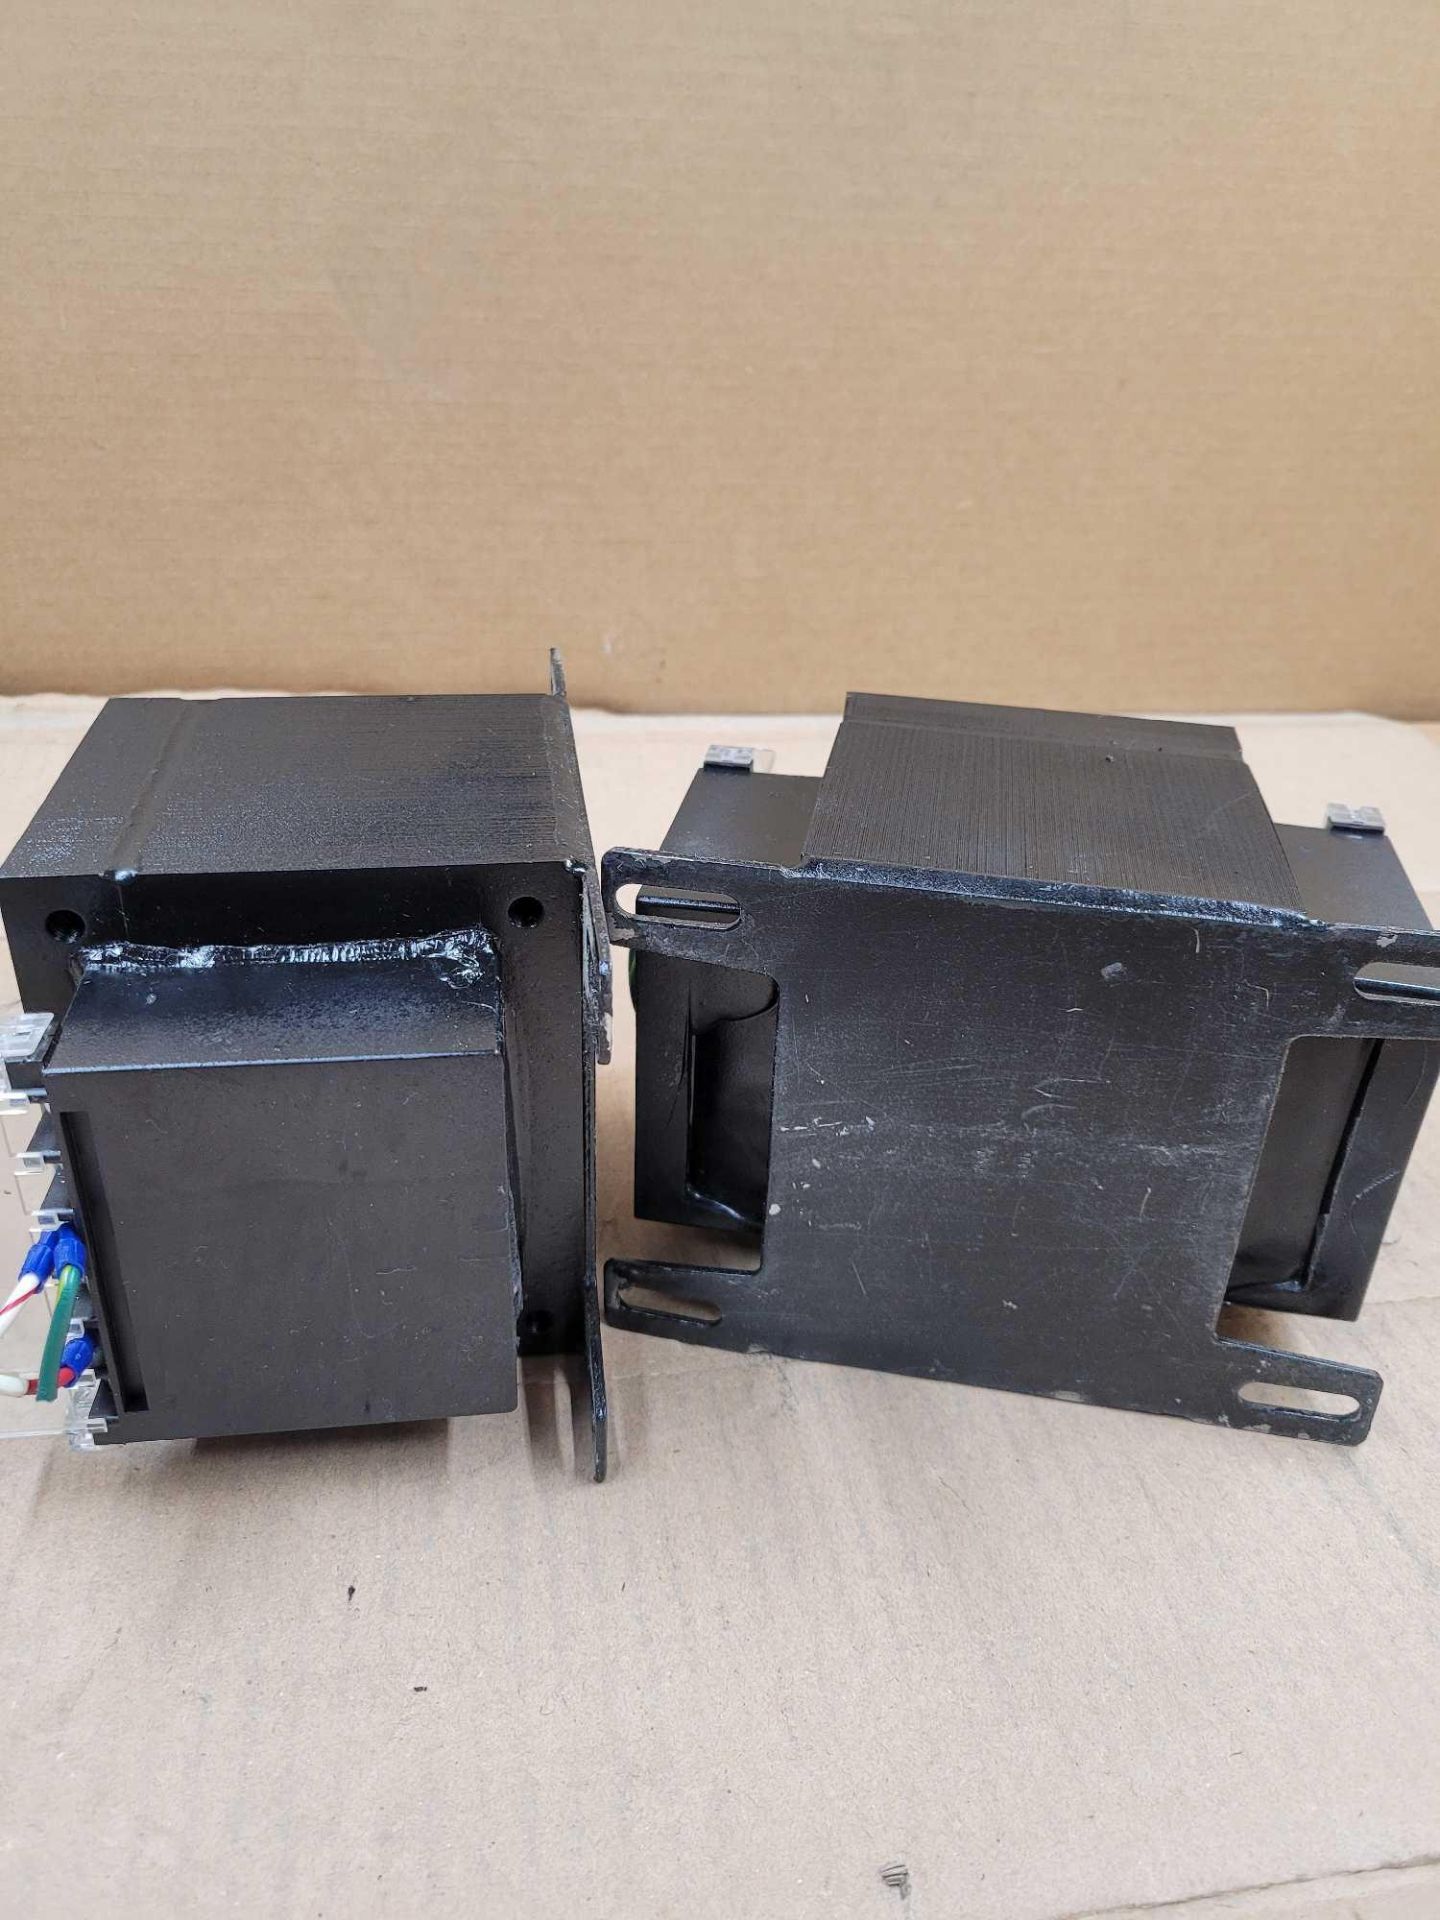 LOT OF 2 EATON C0500E6U / Industrial Control Transformer  /  Lot Weight: 49.0 lbs - Image 4 of 4